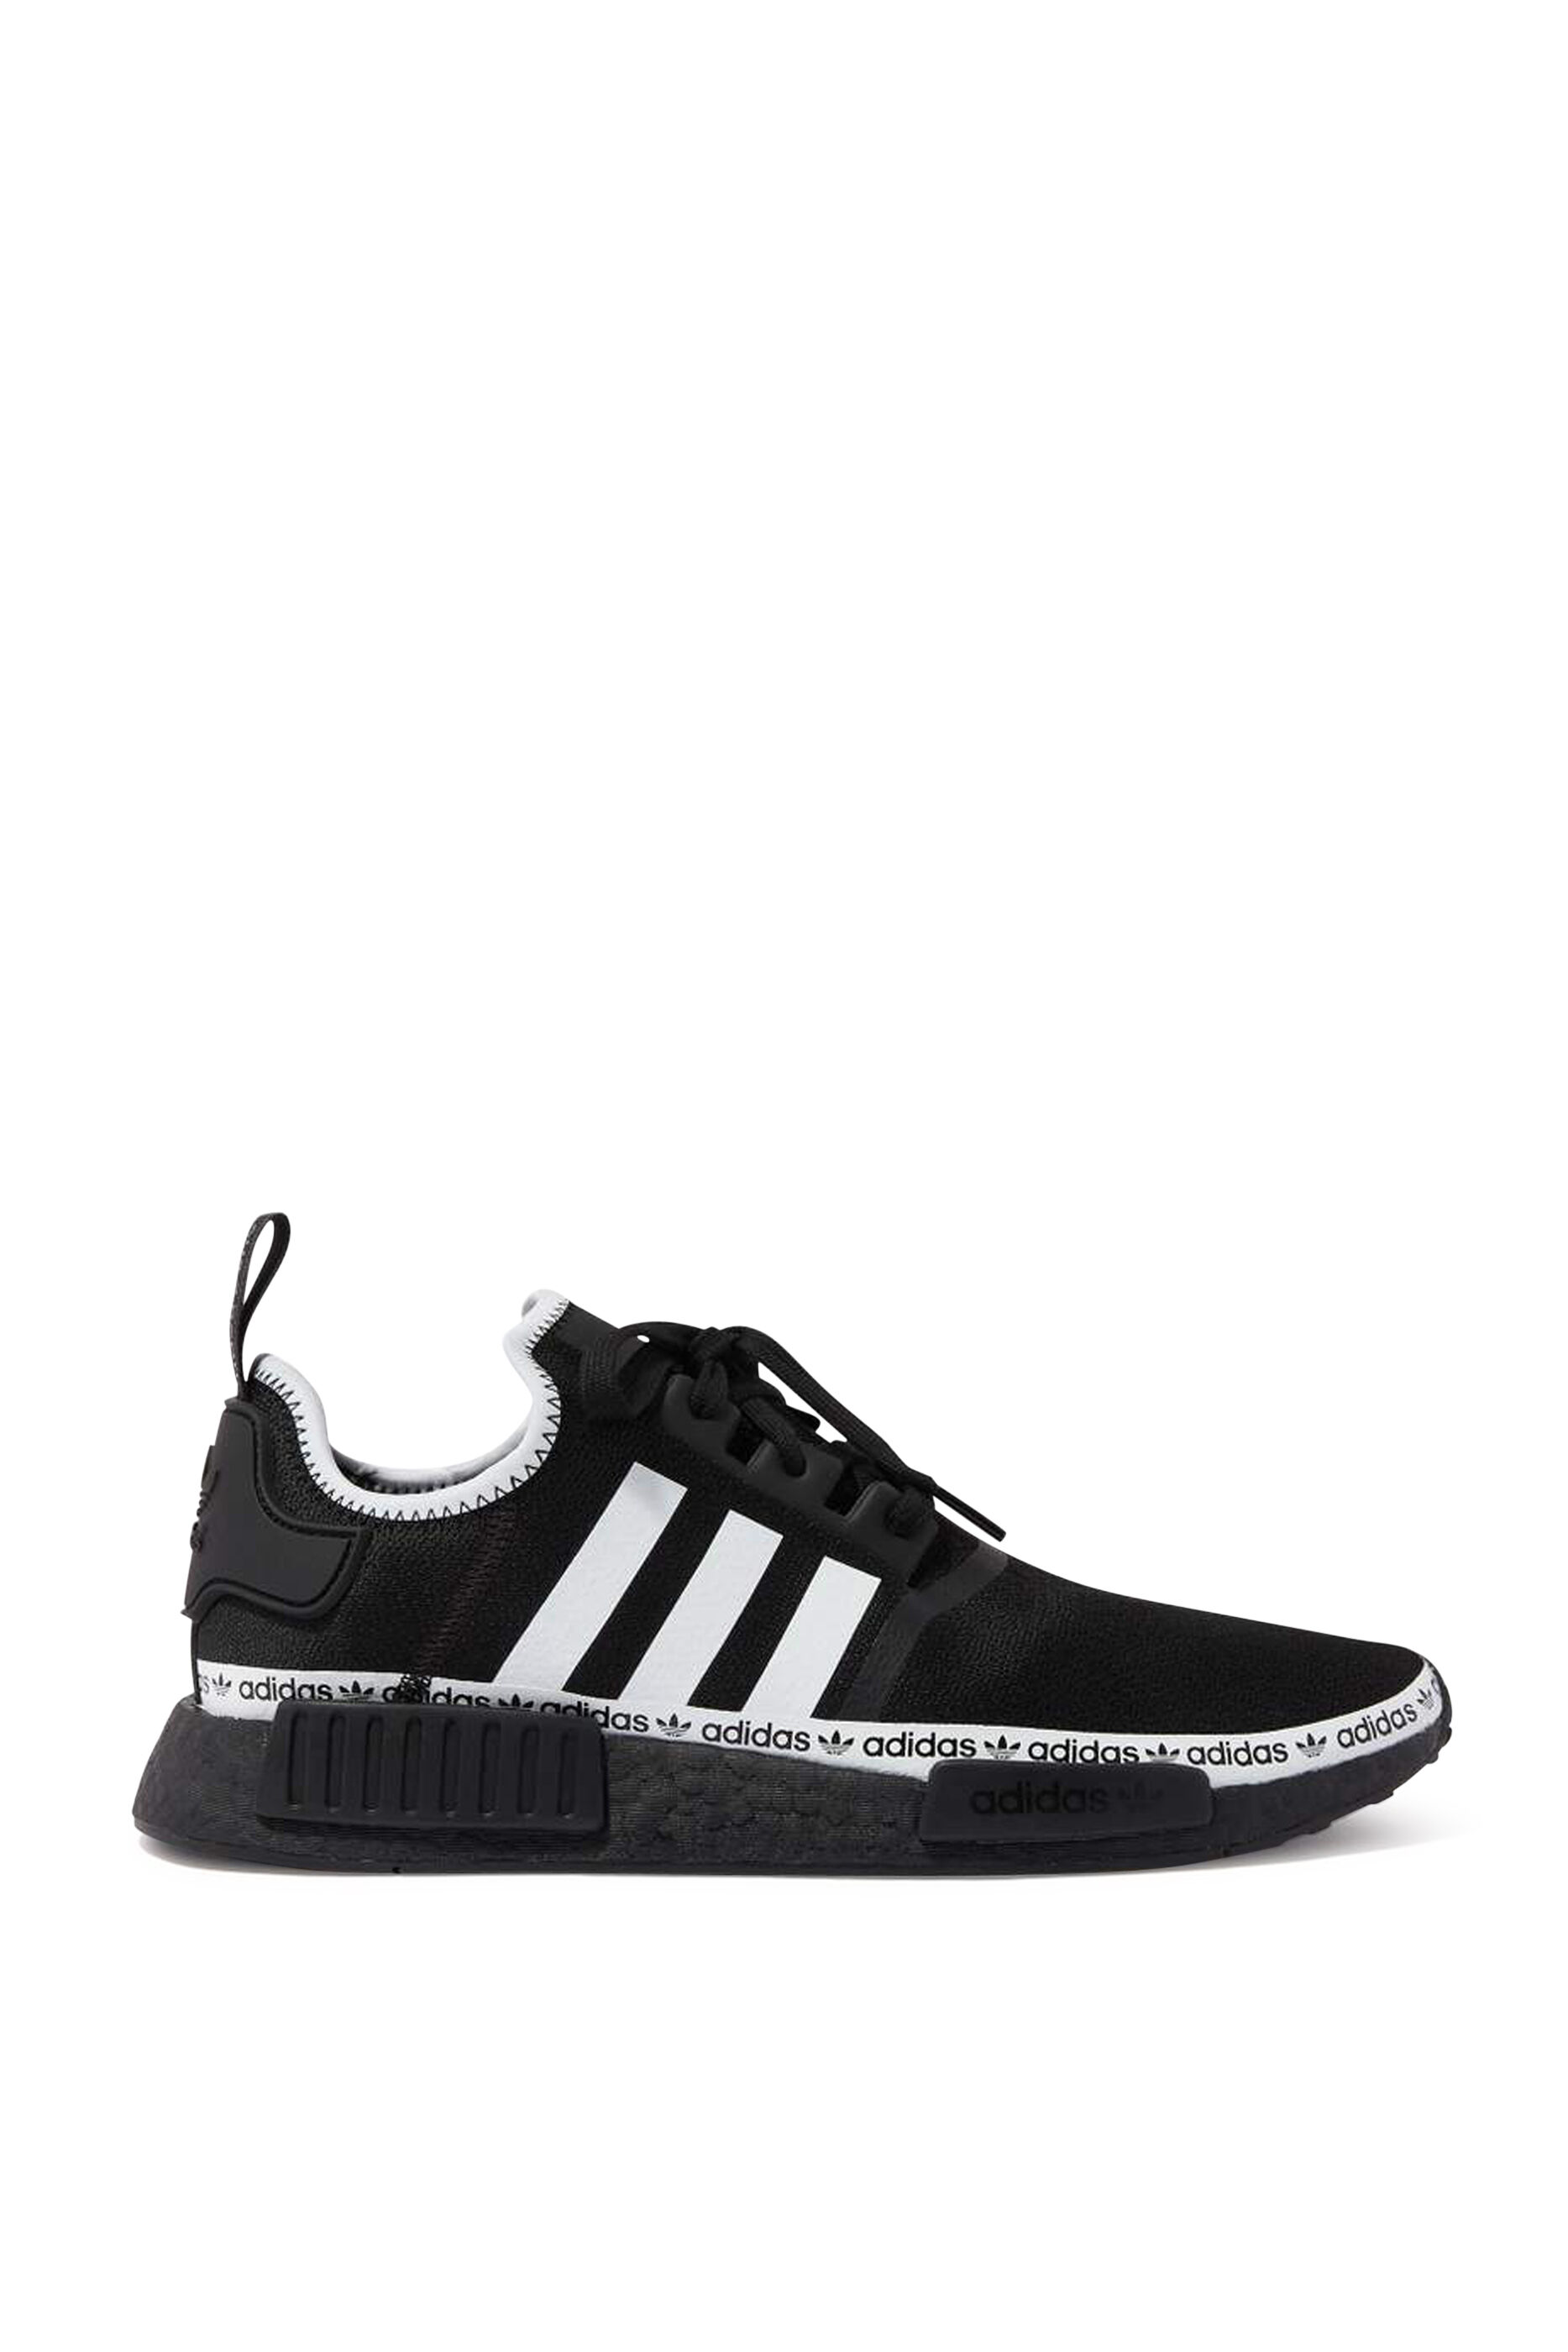 Buy Adidas NMD R1 Sneakers - Mens for 